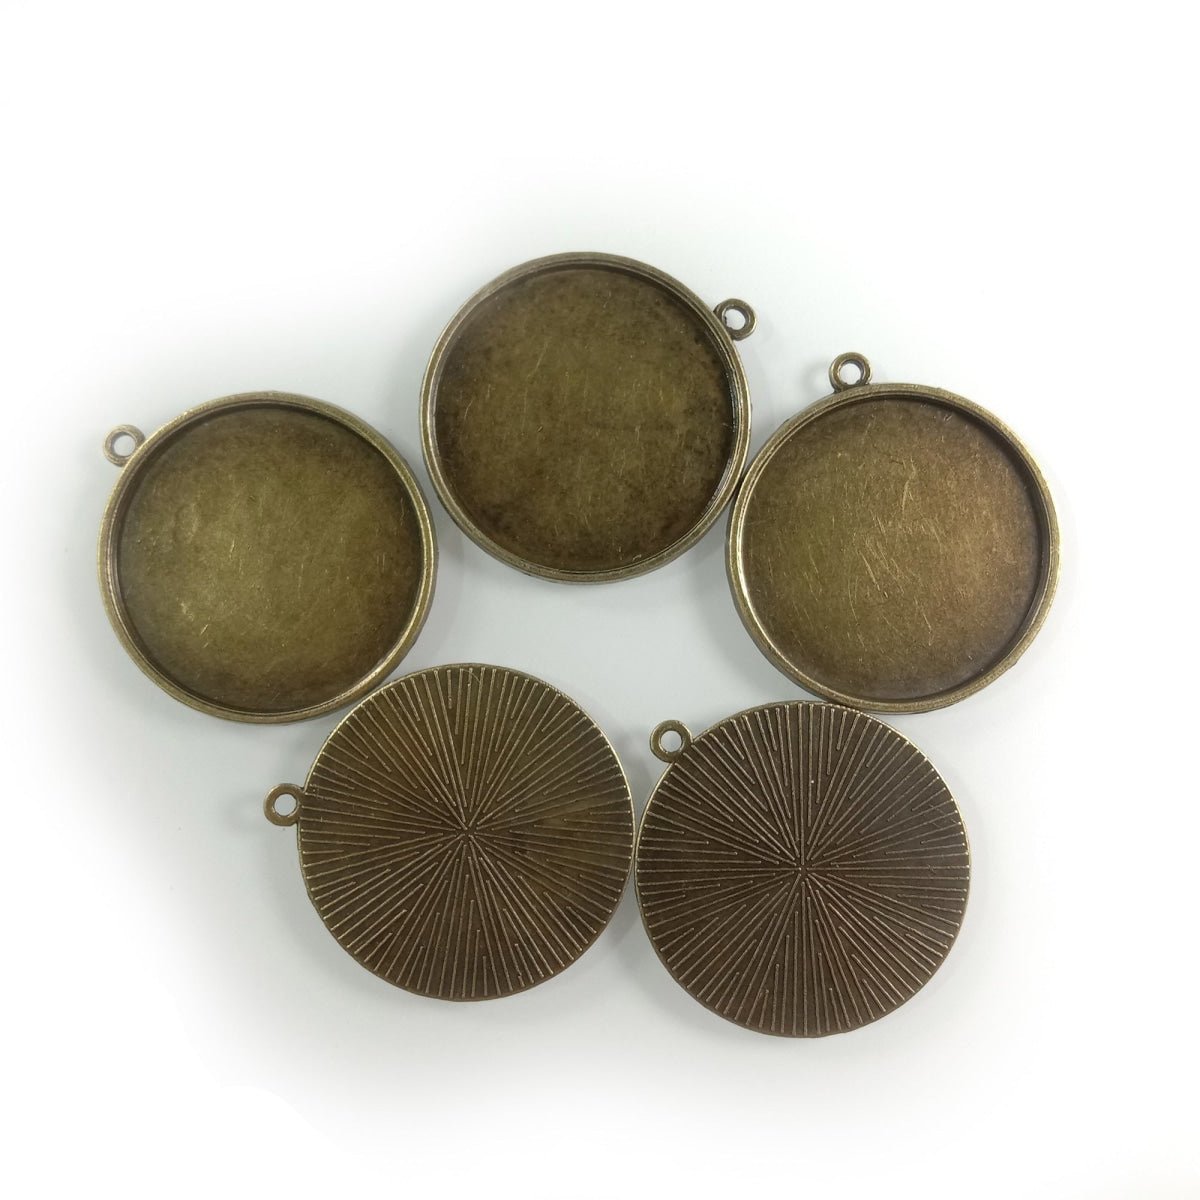 5pcs Cabochon Bases 18mm 30mm ID Antique Bronze Silver Gold Colour Charms Pendant Metal - Bronze 30mm - - Asia Sell